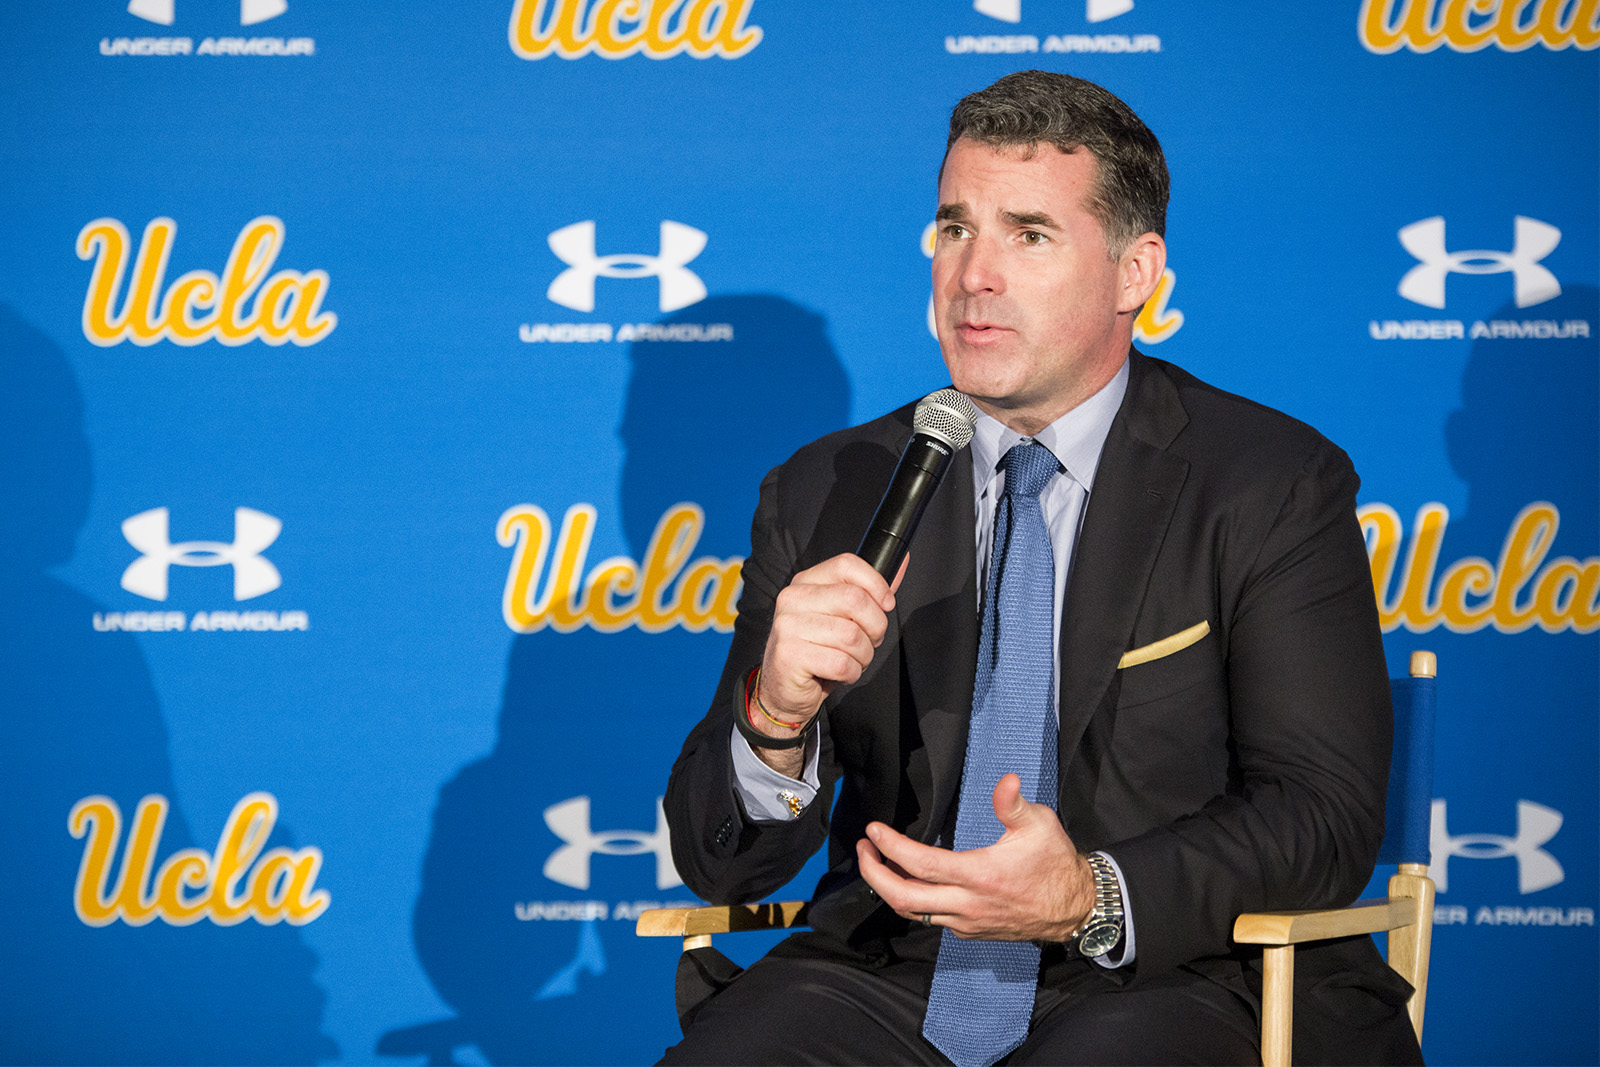 The Dam Truth Ucla Needs To Speak Up Against Under Armour Ceo S Pro Trump Comments Daily Bruin